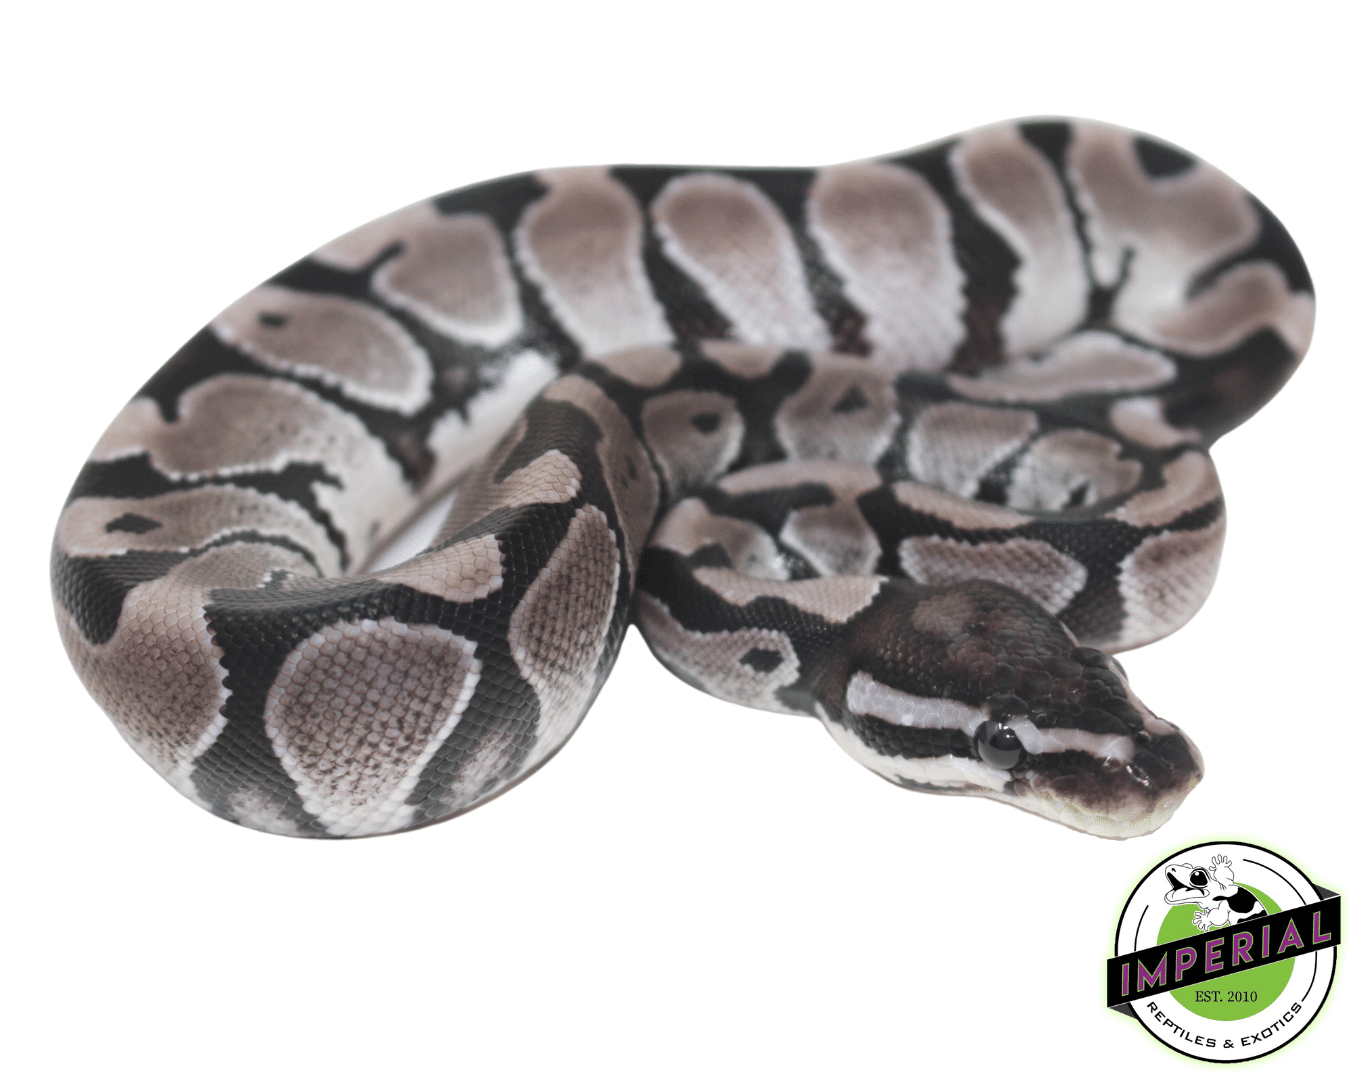 axanthic ball python for sale, buy reptiles online